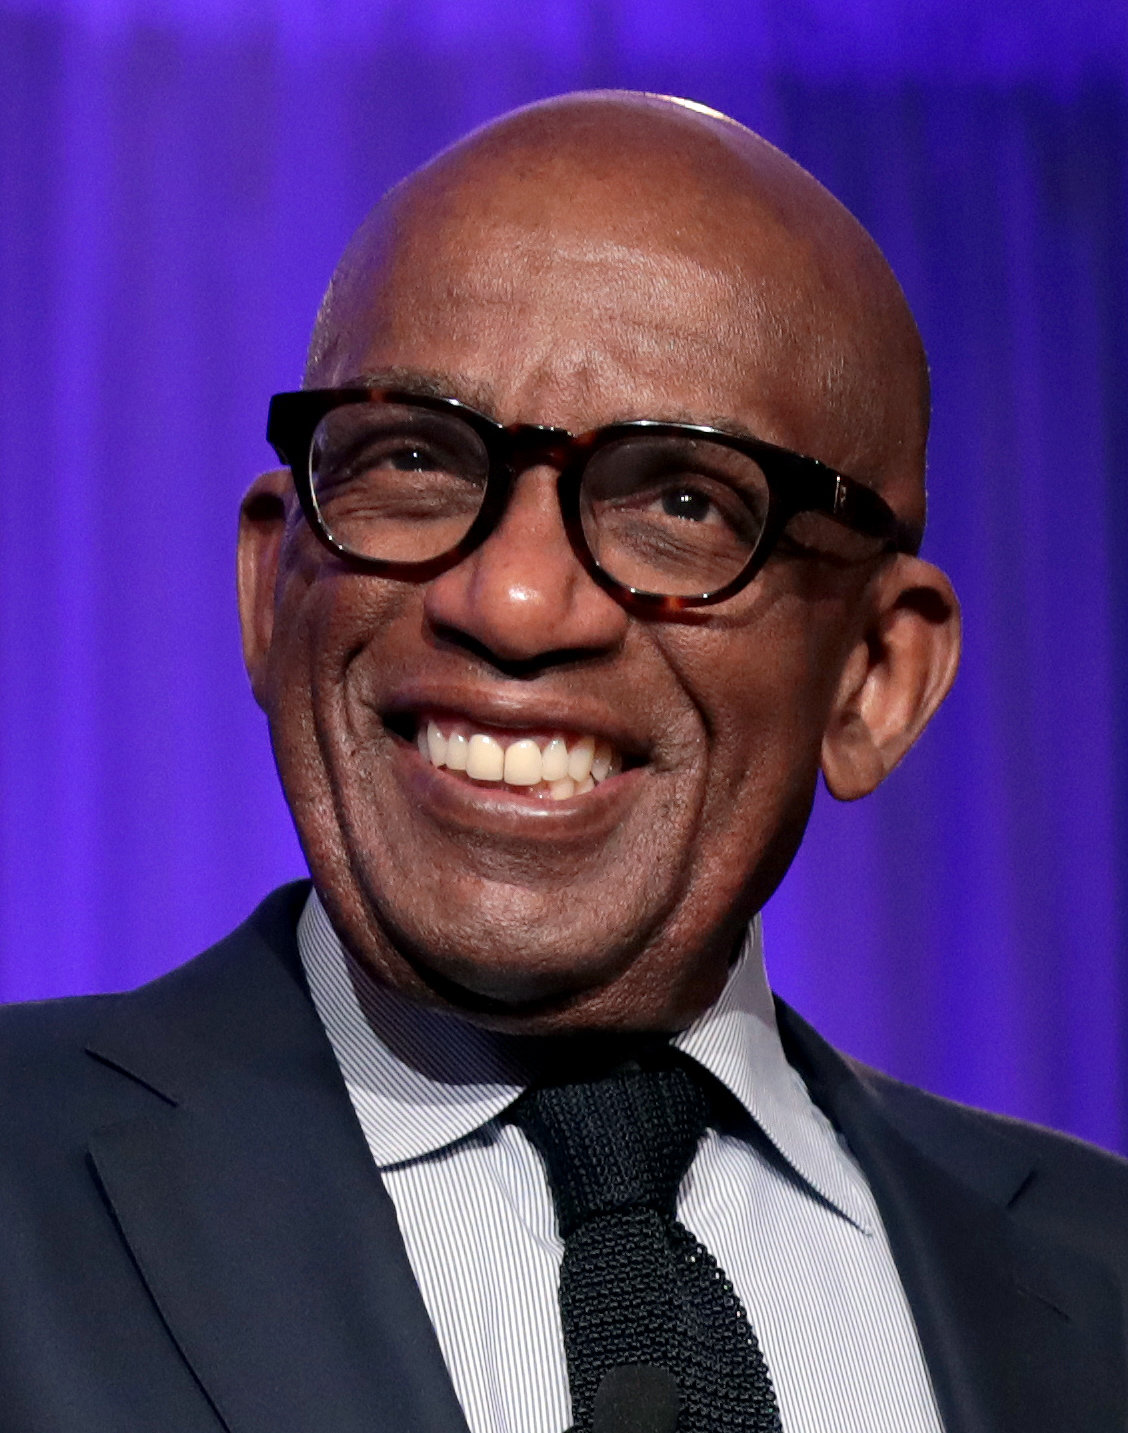 Al Roker Biography, Age, Height, Wife, Family, Education, Career, Net